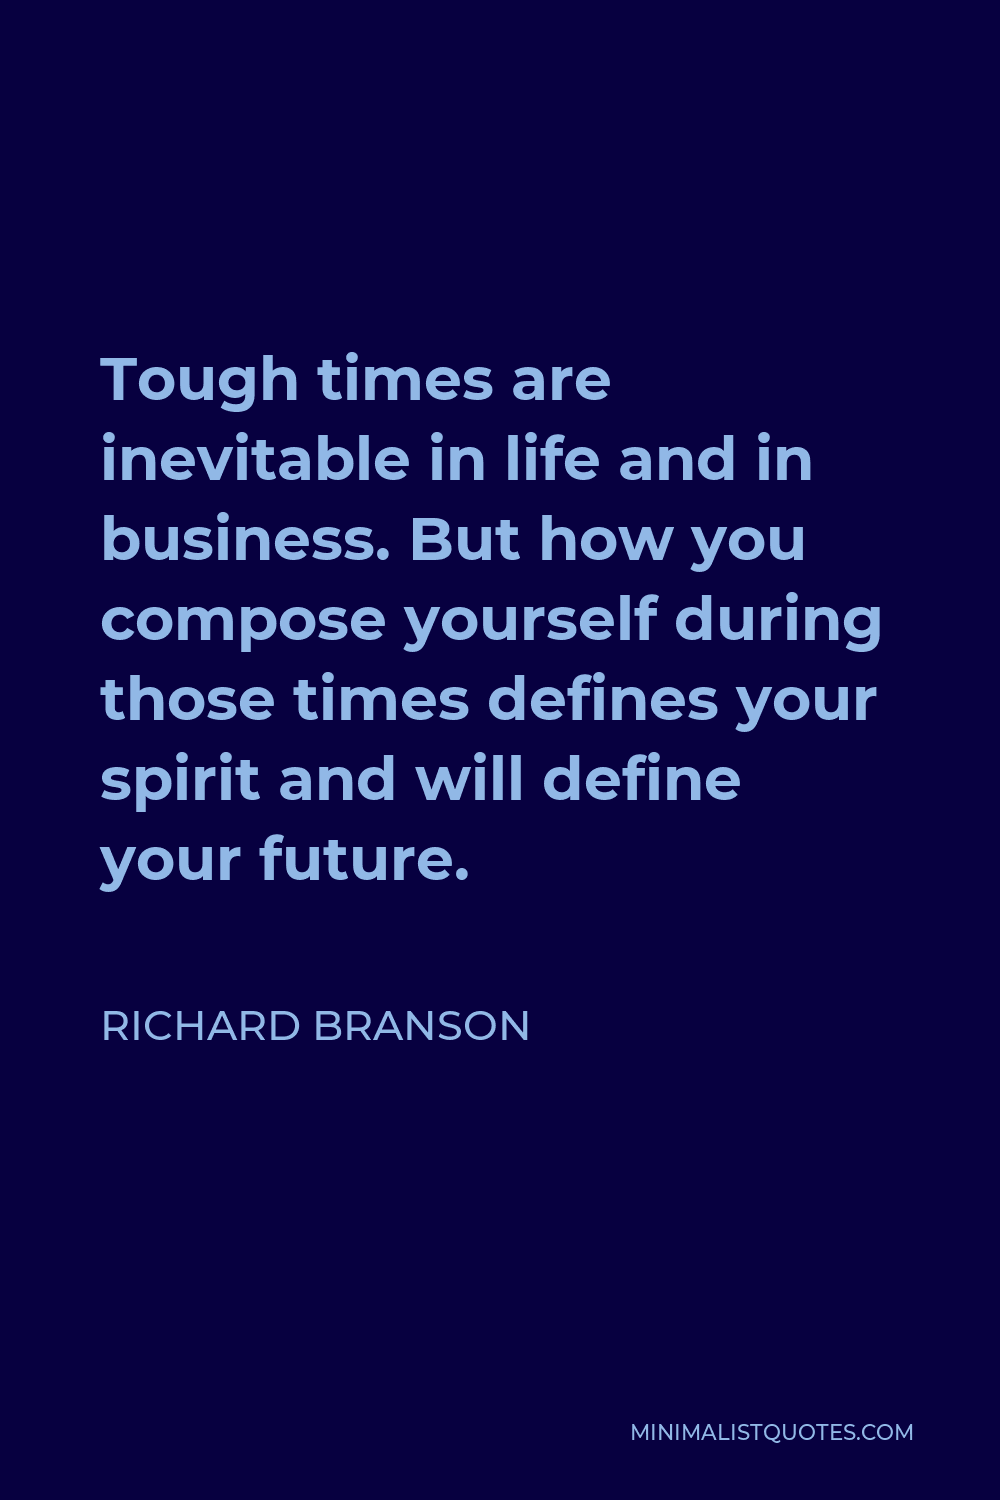 Richard Branson Quote - Tough times are inevitable in life and in business. But how you compose yourself during those times defines your spirit and will define your future.